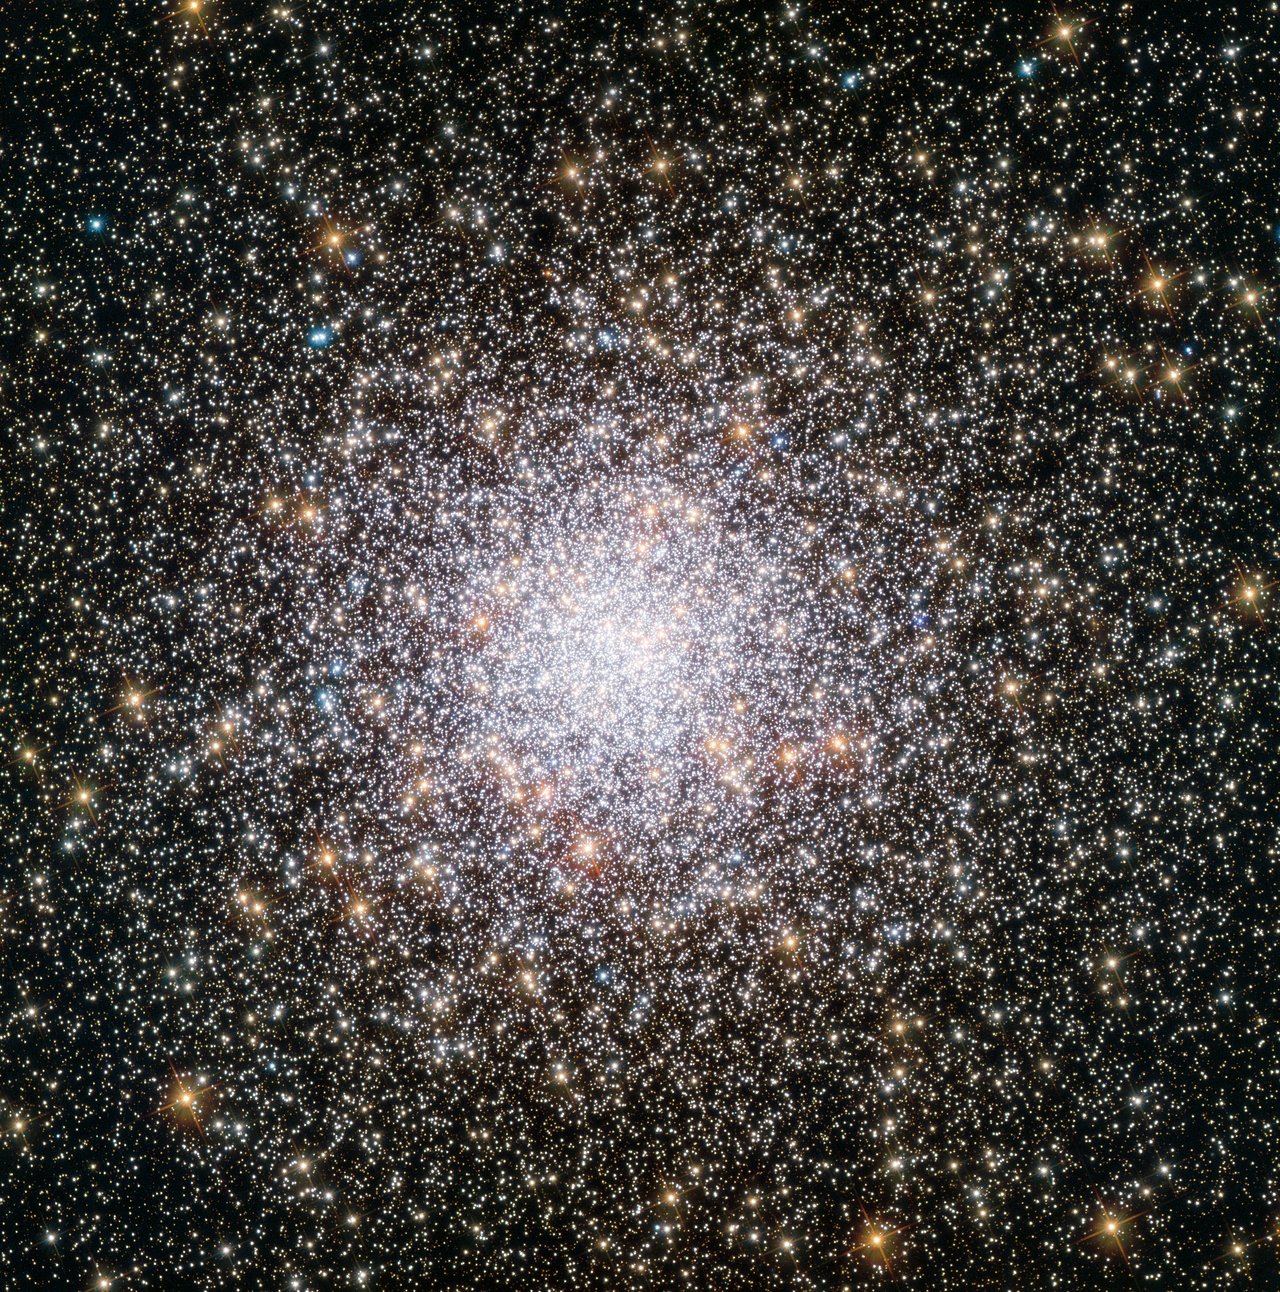  Globular clusters offer some of the most spectacular sights in the night sky. These ornate spheres contain hundreds of thousands of stars, and reside in the outskirts of galaxies. The Milky Way contains over 150 such clusters  and the one shown in this NASA/ESA Hubble Space Telescope image, named NGC 362, is one of the more unusual ones. As stars make their way through life they fuse elements together in their cores, creating heavier and heavier elements  known in astronomy as metals  in the process. When these stars die, they flood their surroundings with the material they have formed during their lifetimes, enriching the interstellar medium with metals. Stars that form later therefore contain higher proportions of metals than their older relatives. By studying the different elements present within individual stars in NGC 362, astronomers discovered that the cluster boasts a surprisingly high metal content, indicating that it is younger than expected. Although most globular clusters are much older than the majority of stars in their host galaxy, NGC 362 bucks the trend, with an age lying between 10 and 11 billion years old. For reference, the age of the Milky Way is estimated to be above 13 billion years. This image, in which you can view NGC 362s individual stars, was taken by Hubbles Advanced Camera for Surveys (ACS).